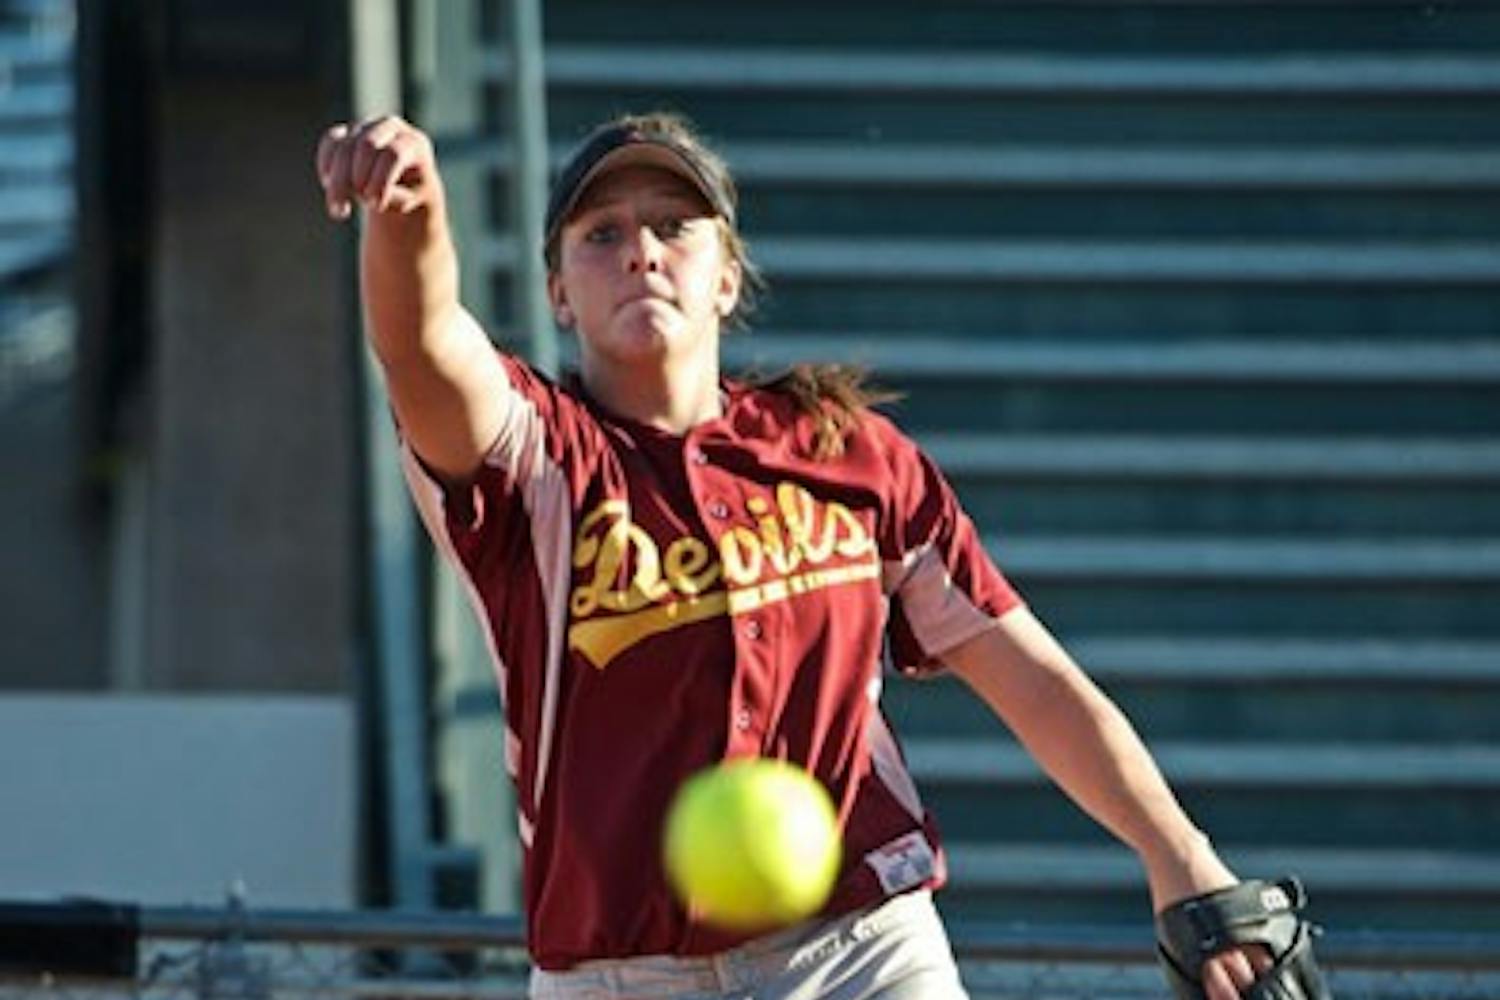 COOL CUSTOMER: ASU sophomore pitcher Hillary Bach has posted a 17-2 record with a 1.99 ERA in 2010, but she’s also known for using her happy personality to stay calm in the circle. (Photo by Michael Arellano)